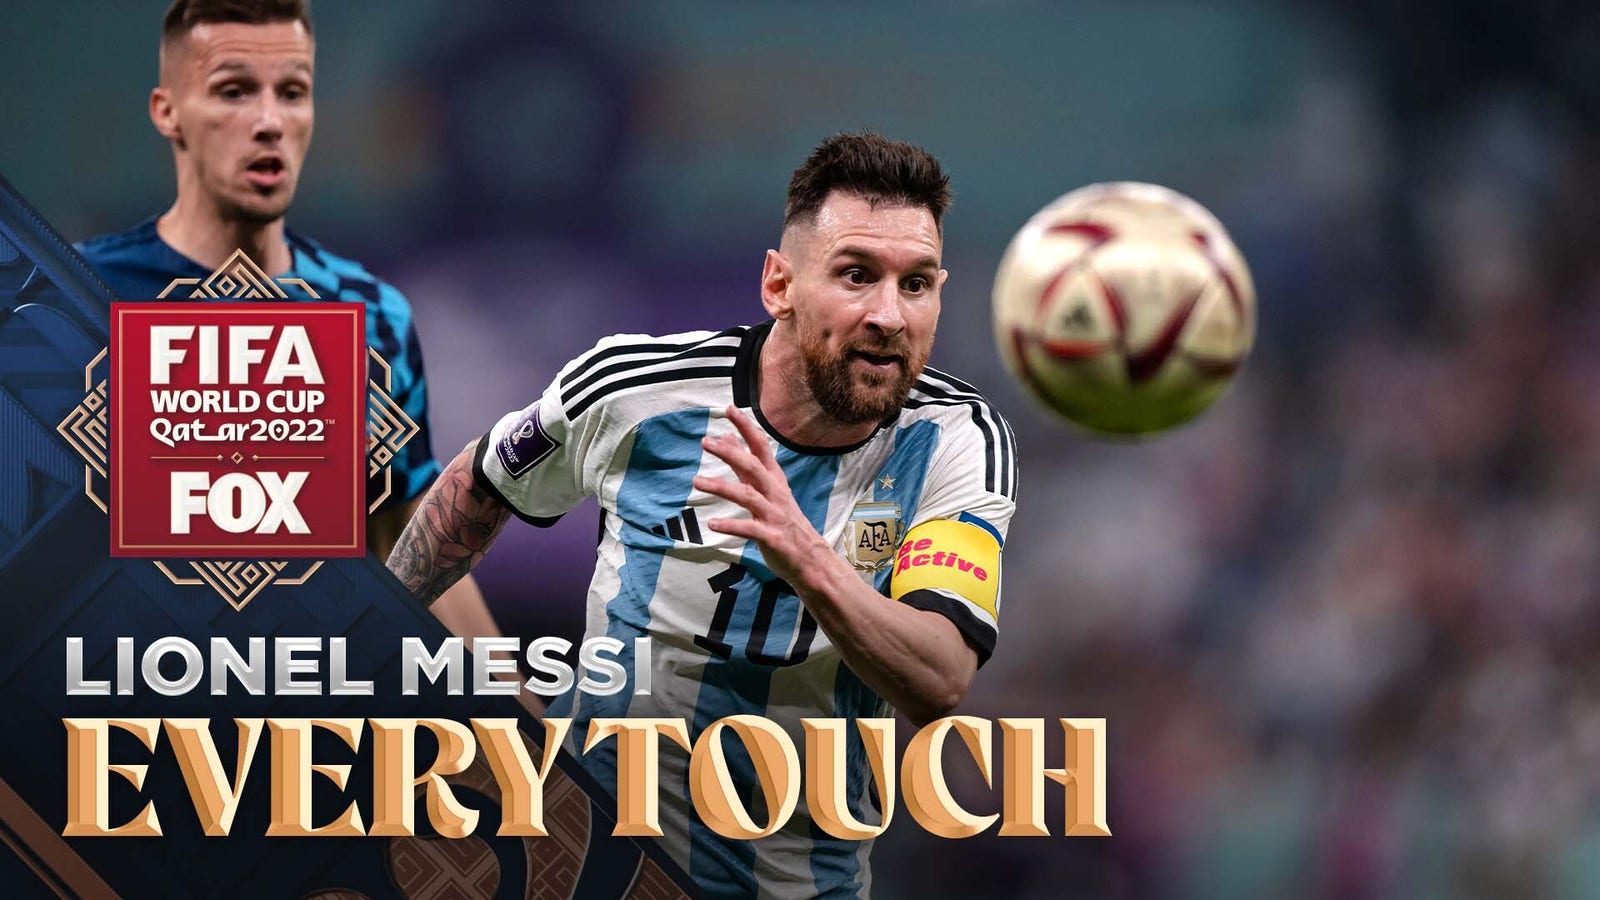 Lionel Messi: Every touch in the semifinal